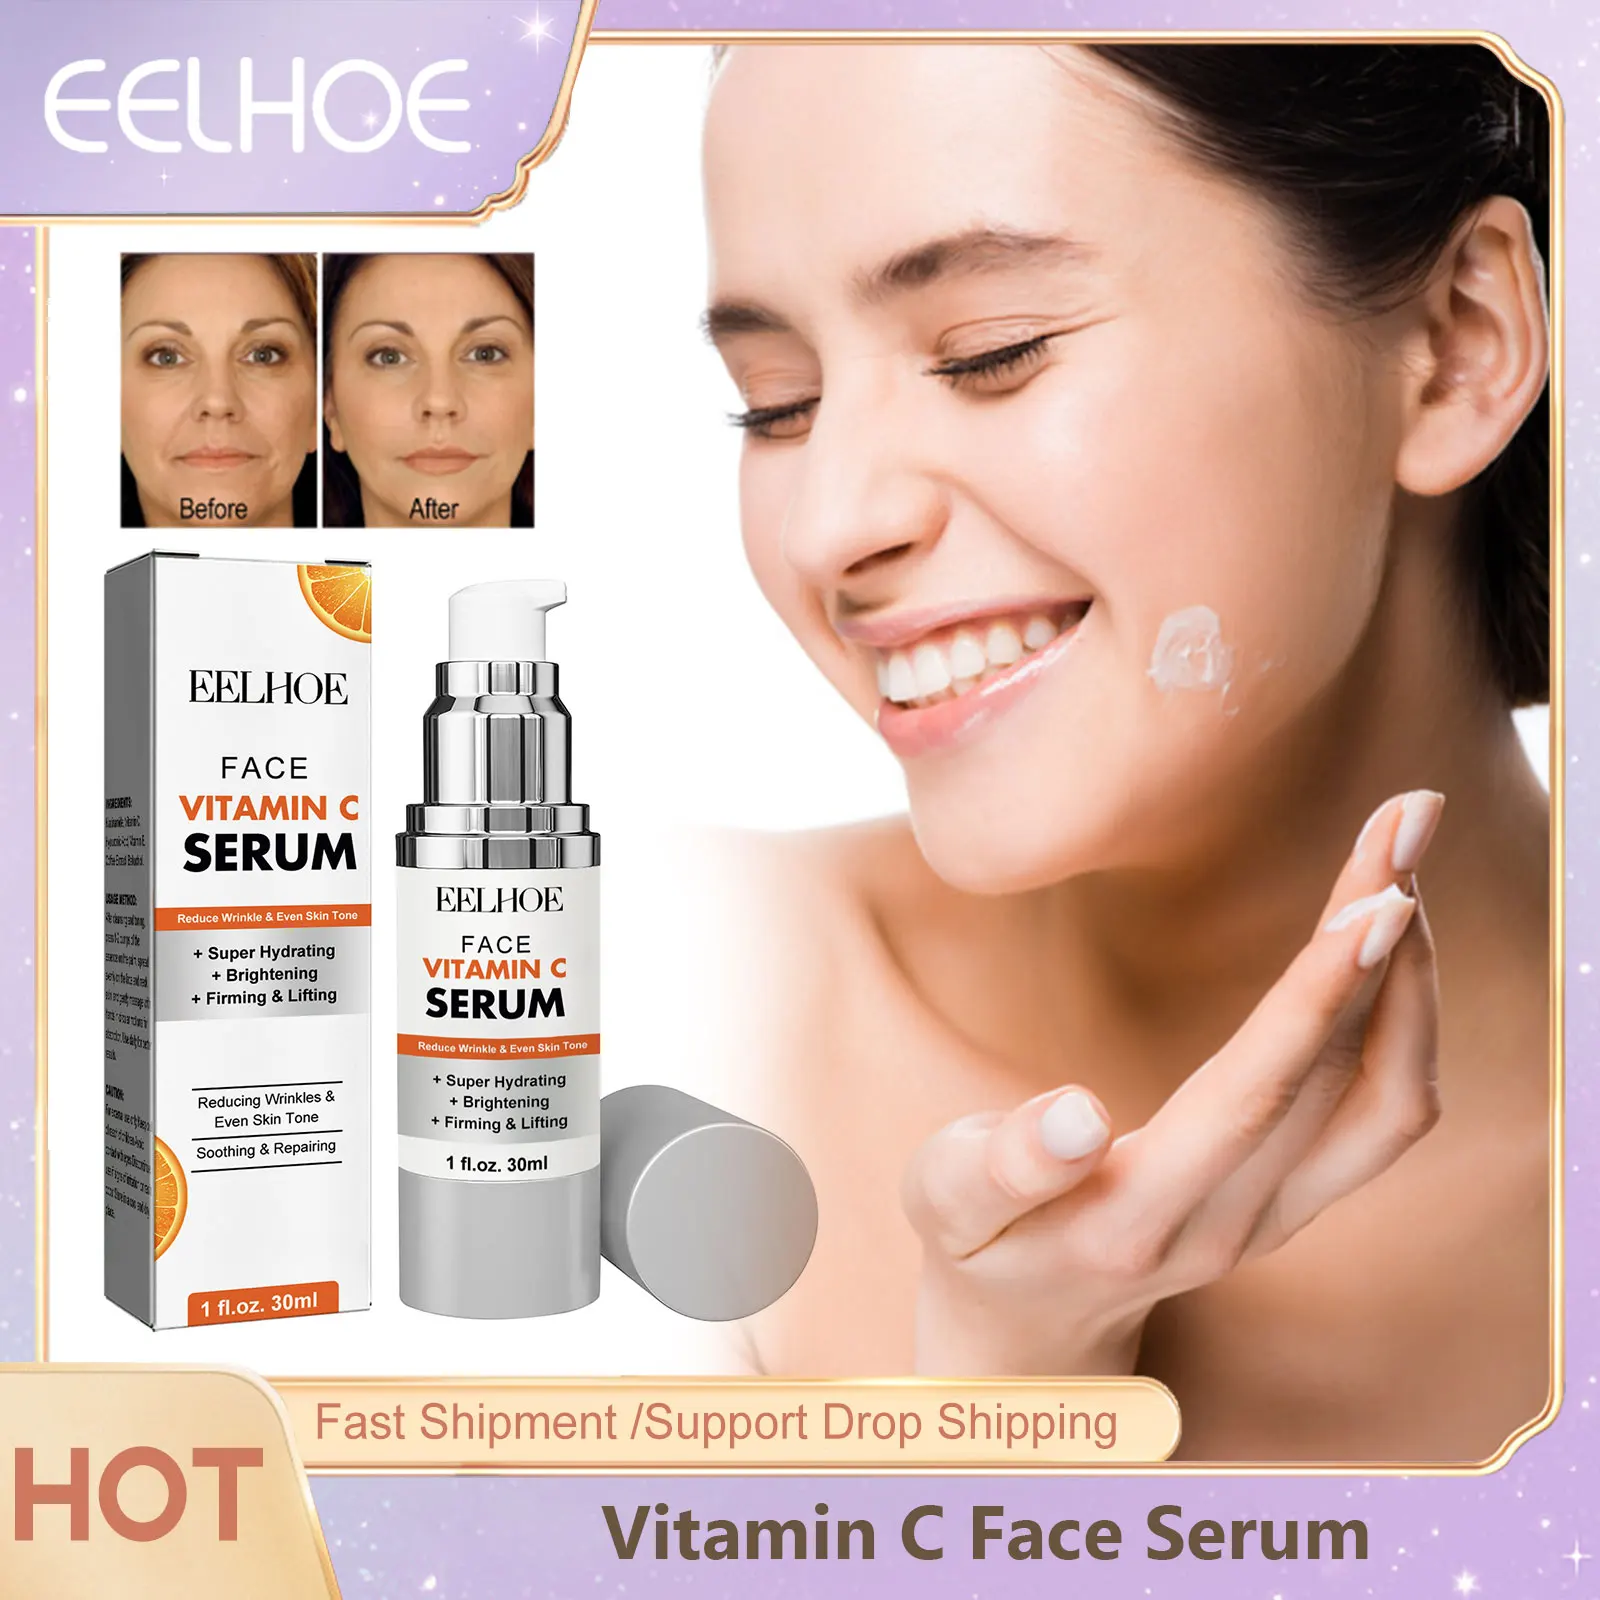 Vitamin C Face Serum Moisturizing Anti Aging Wrinkles Fade Fine Lines Removal Dark Spots Whitening Facial Skin Essence Products